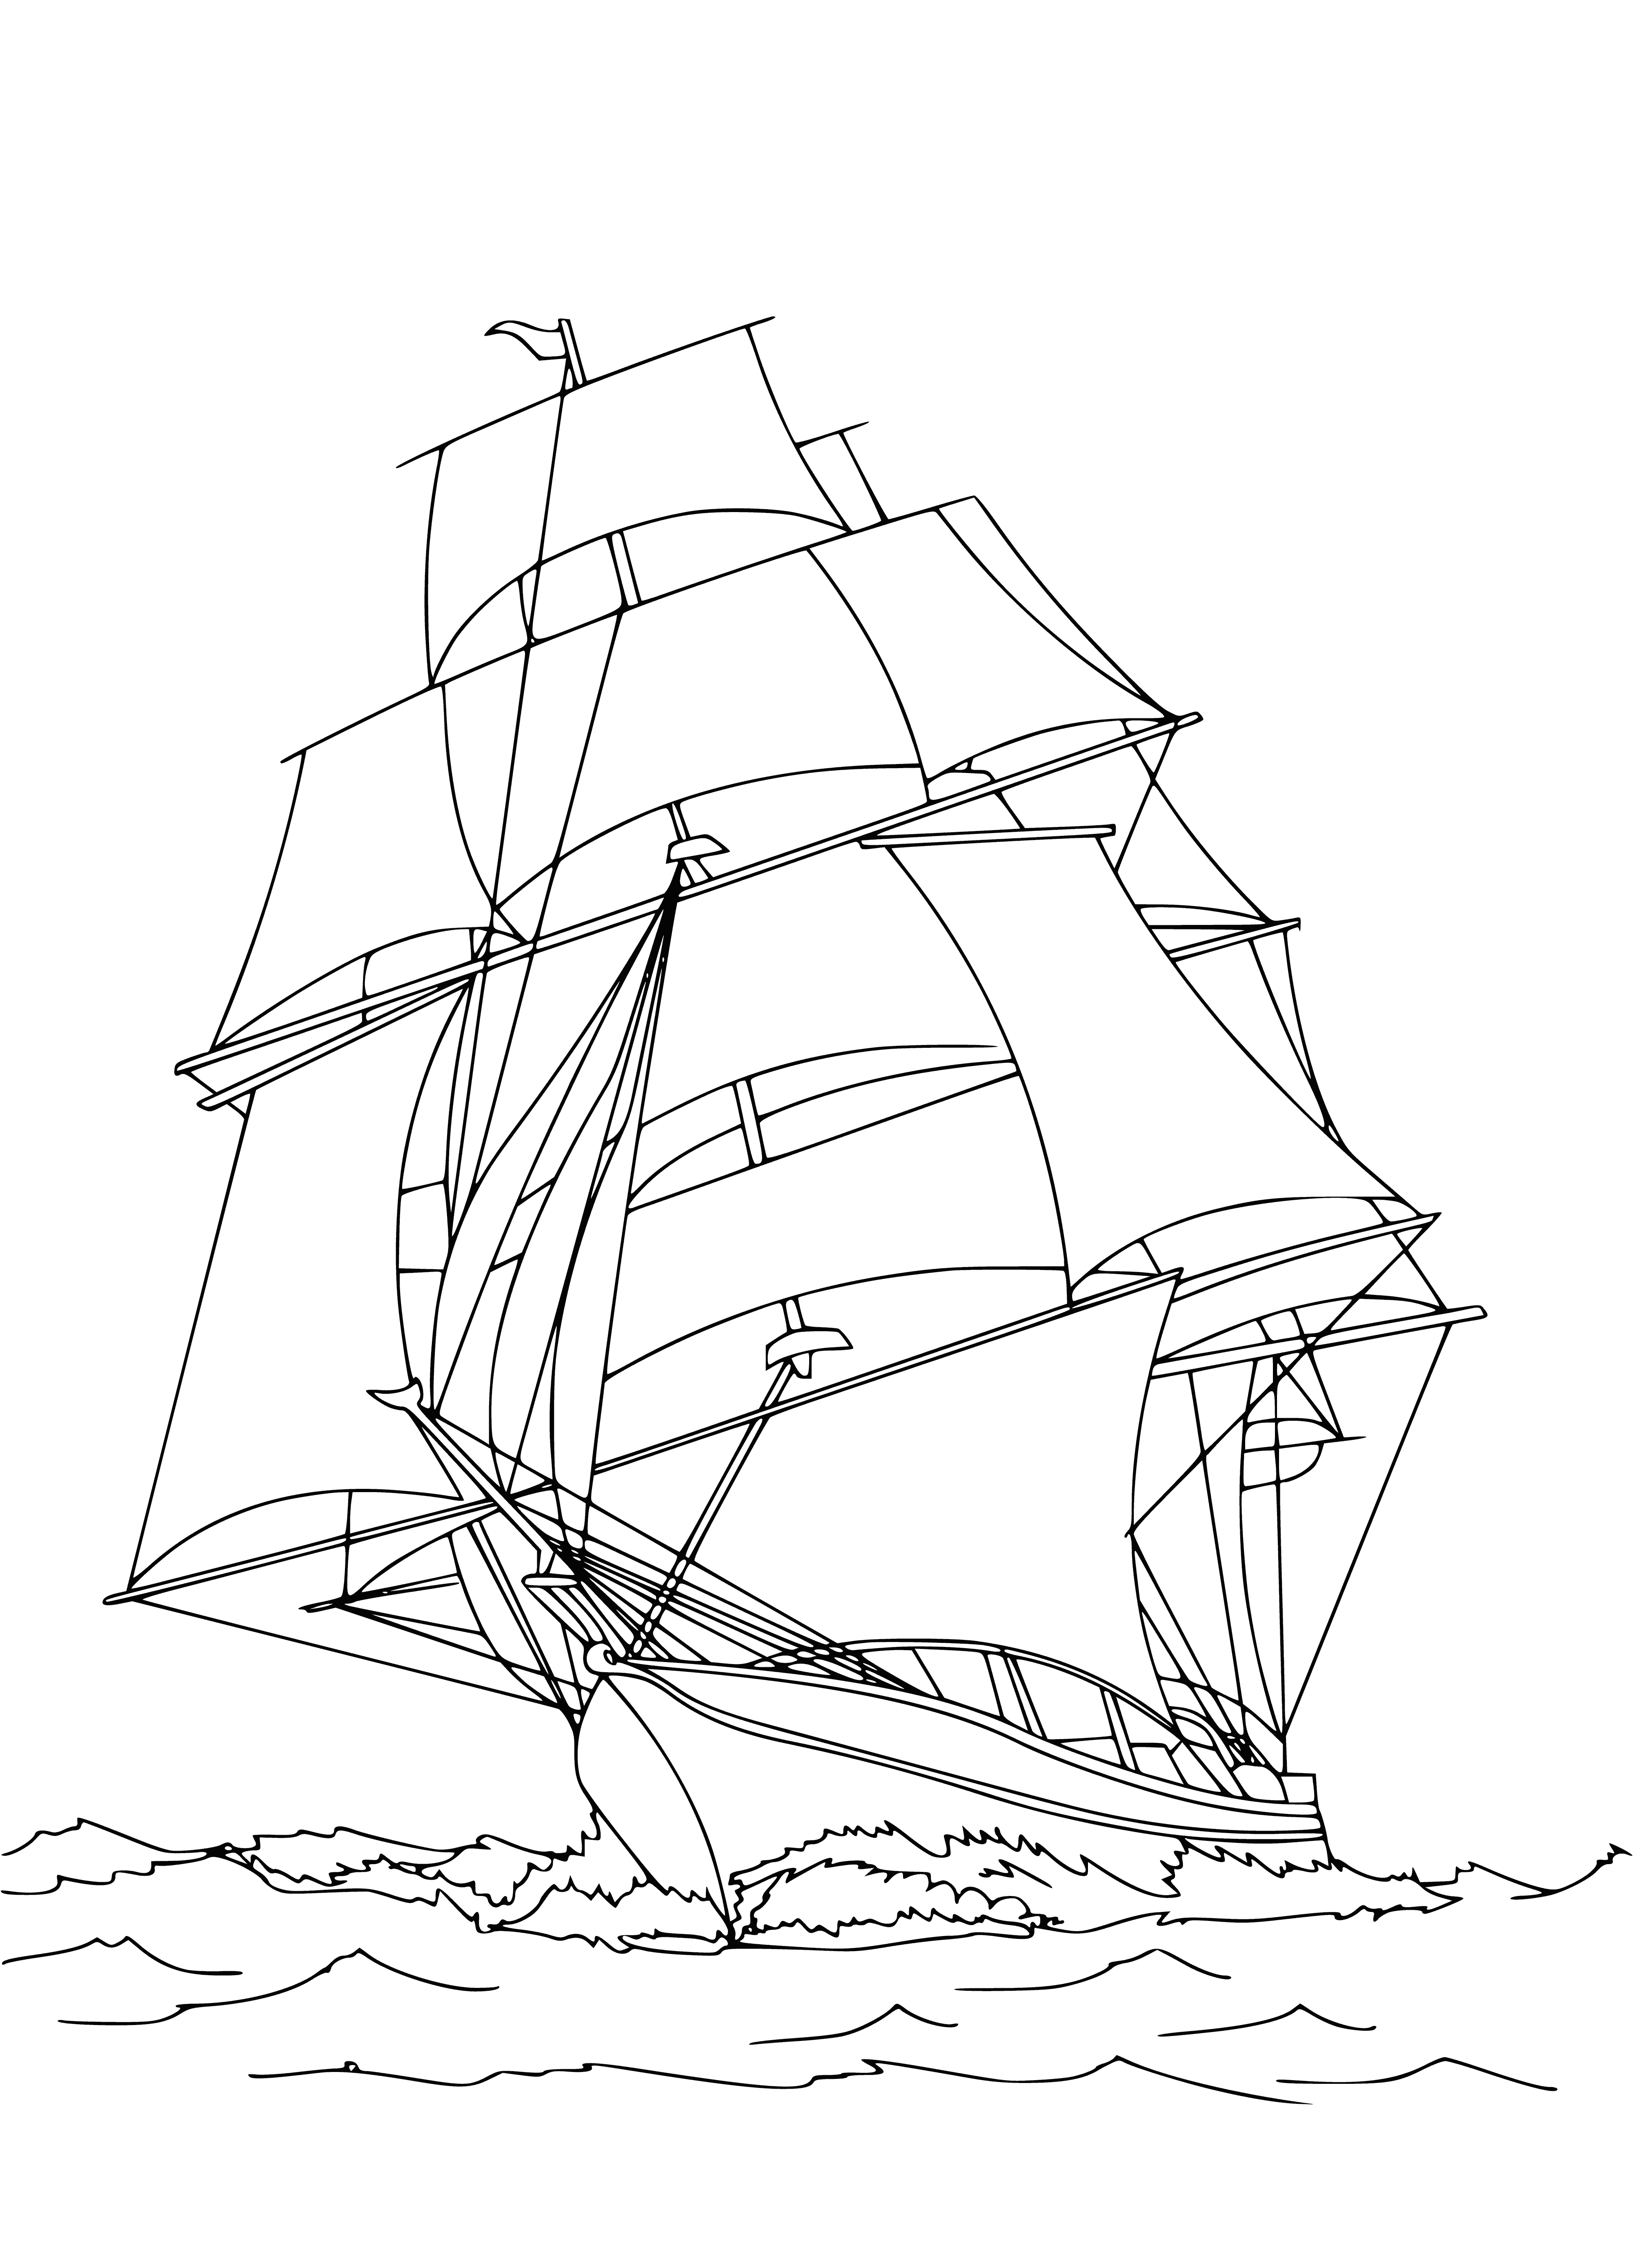 coloring page: Sailboats can range in size from small dinghies to ocean-going vessels, propelled by wind and operated with sails. #sailing #boating